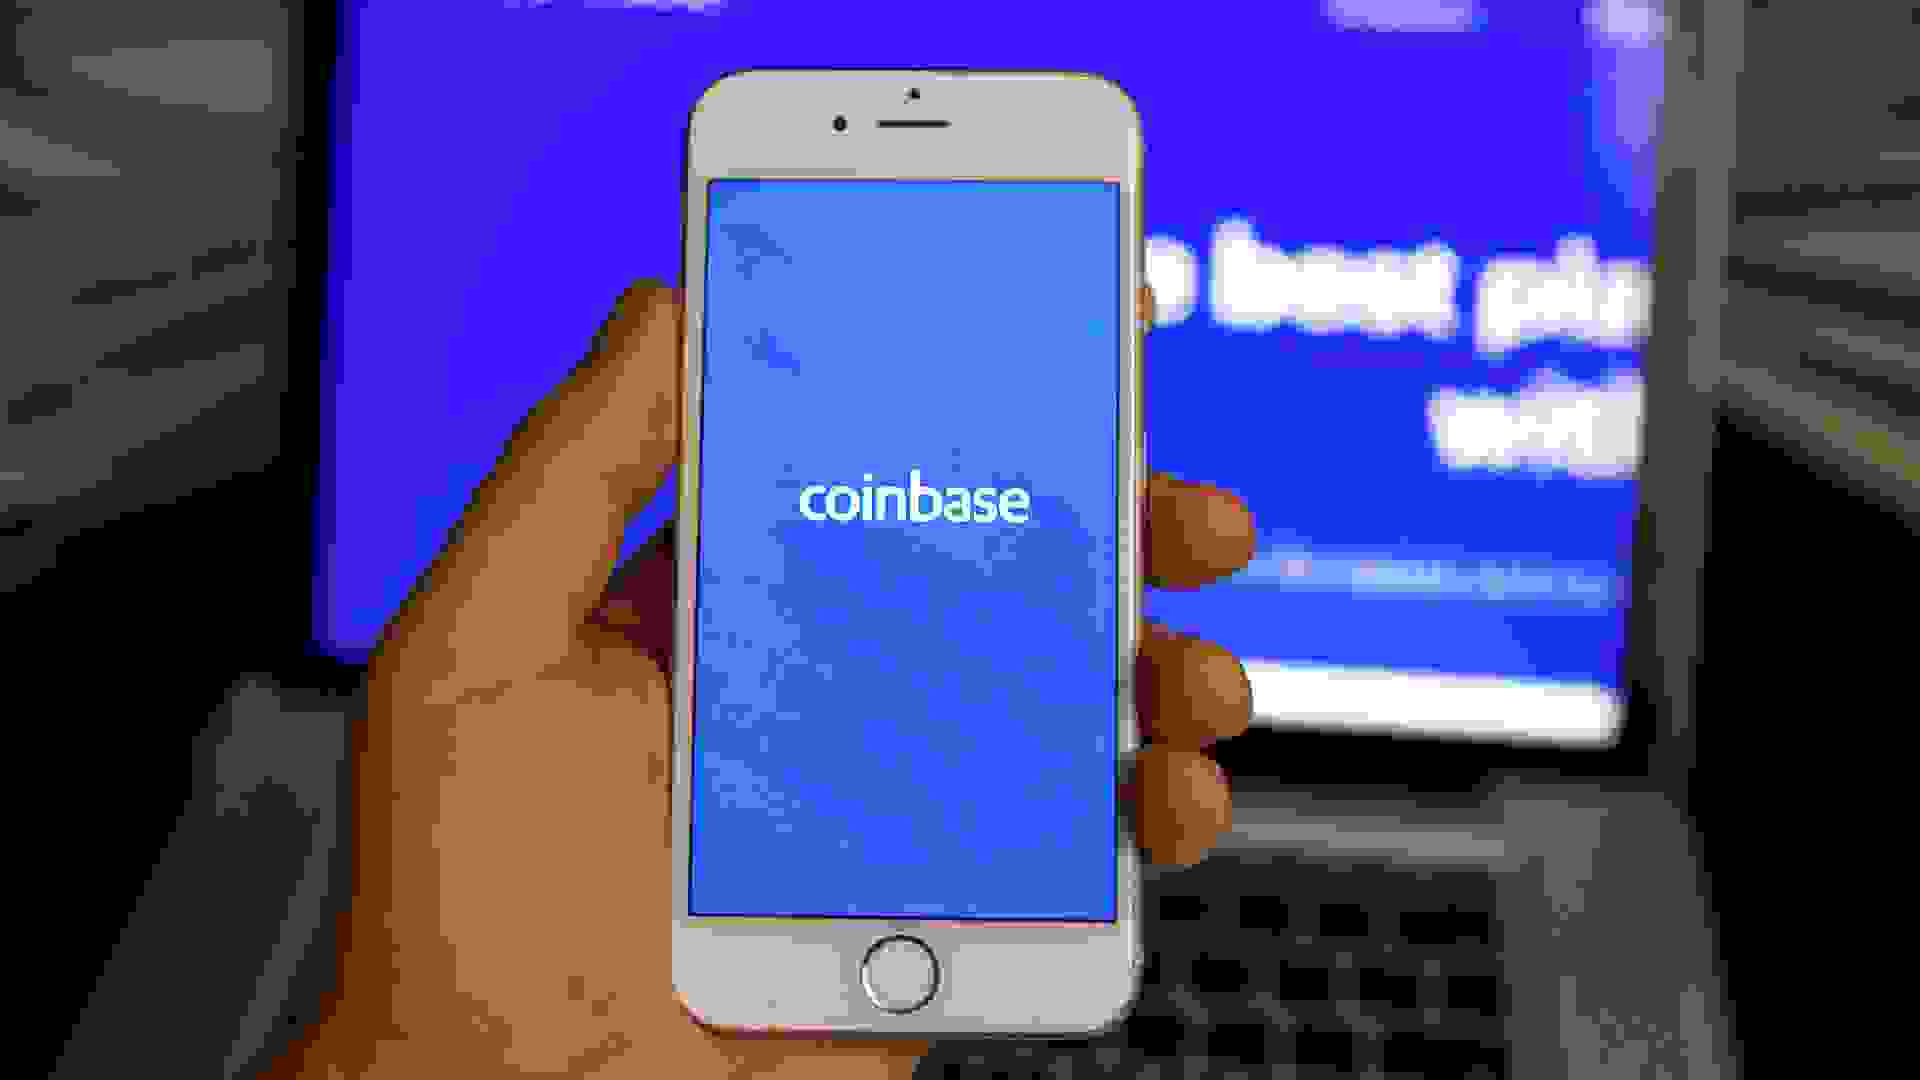 Coinbase app for cryptocurrency trading